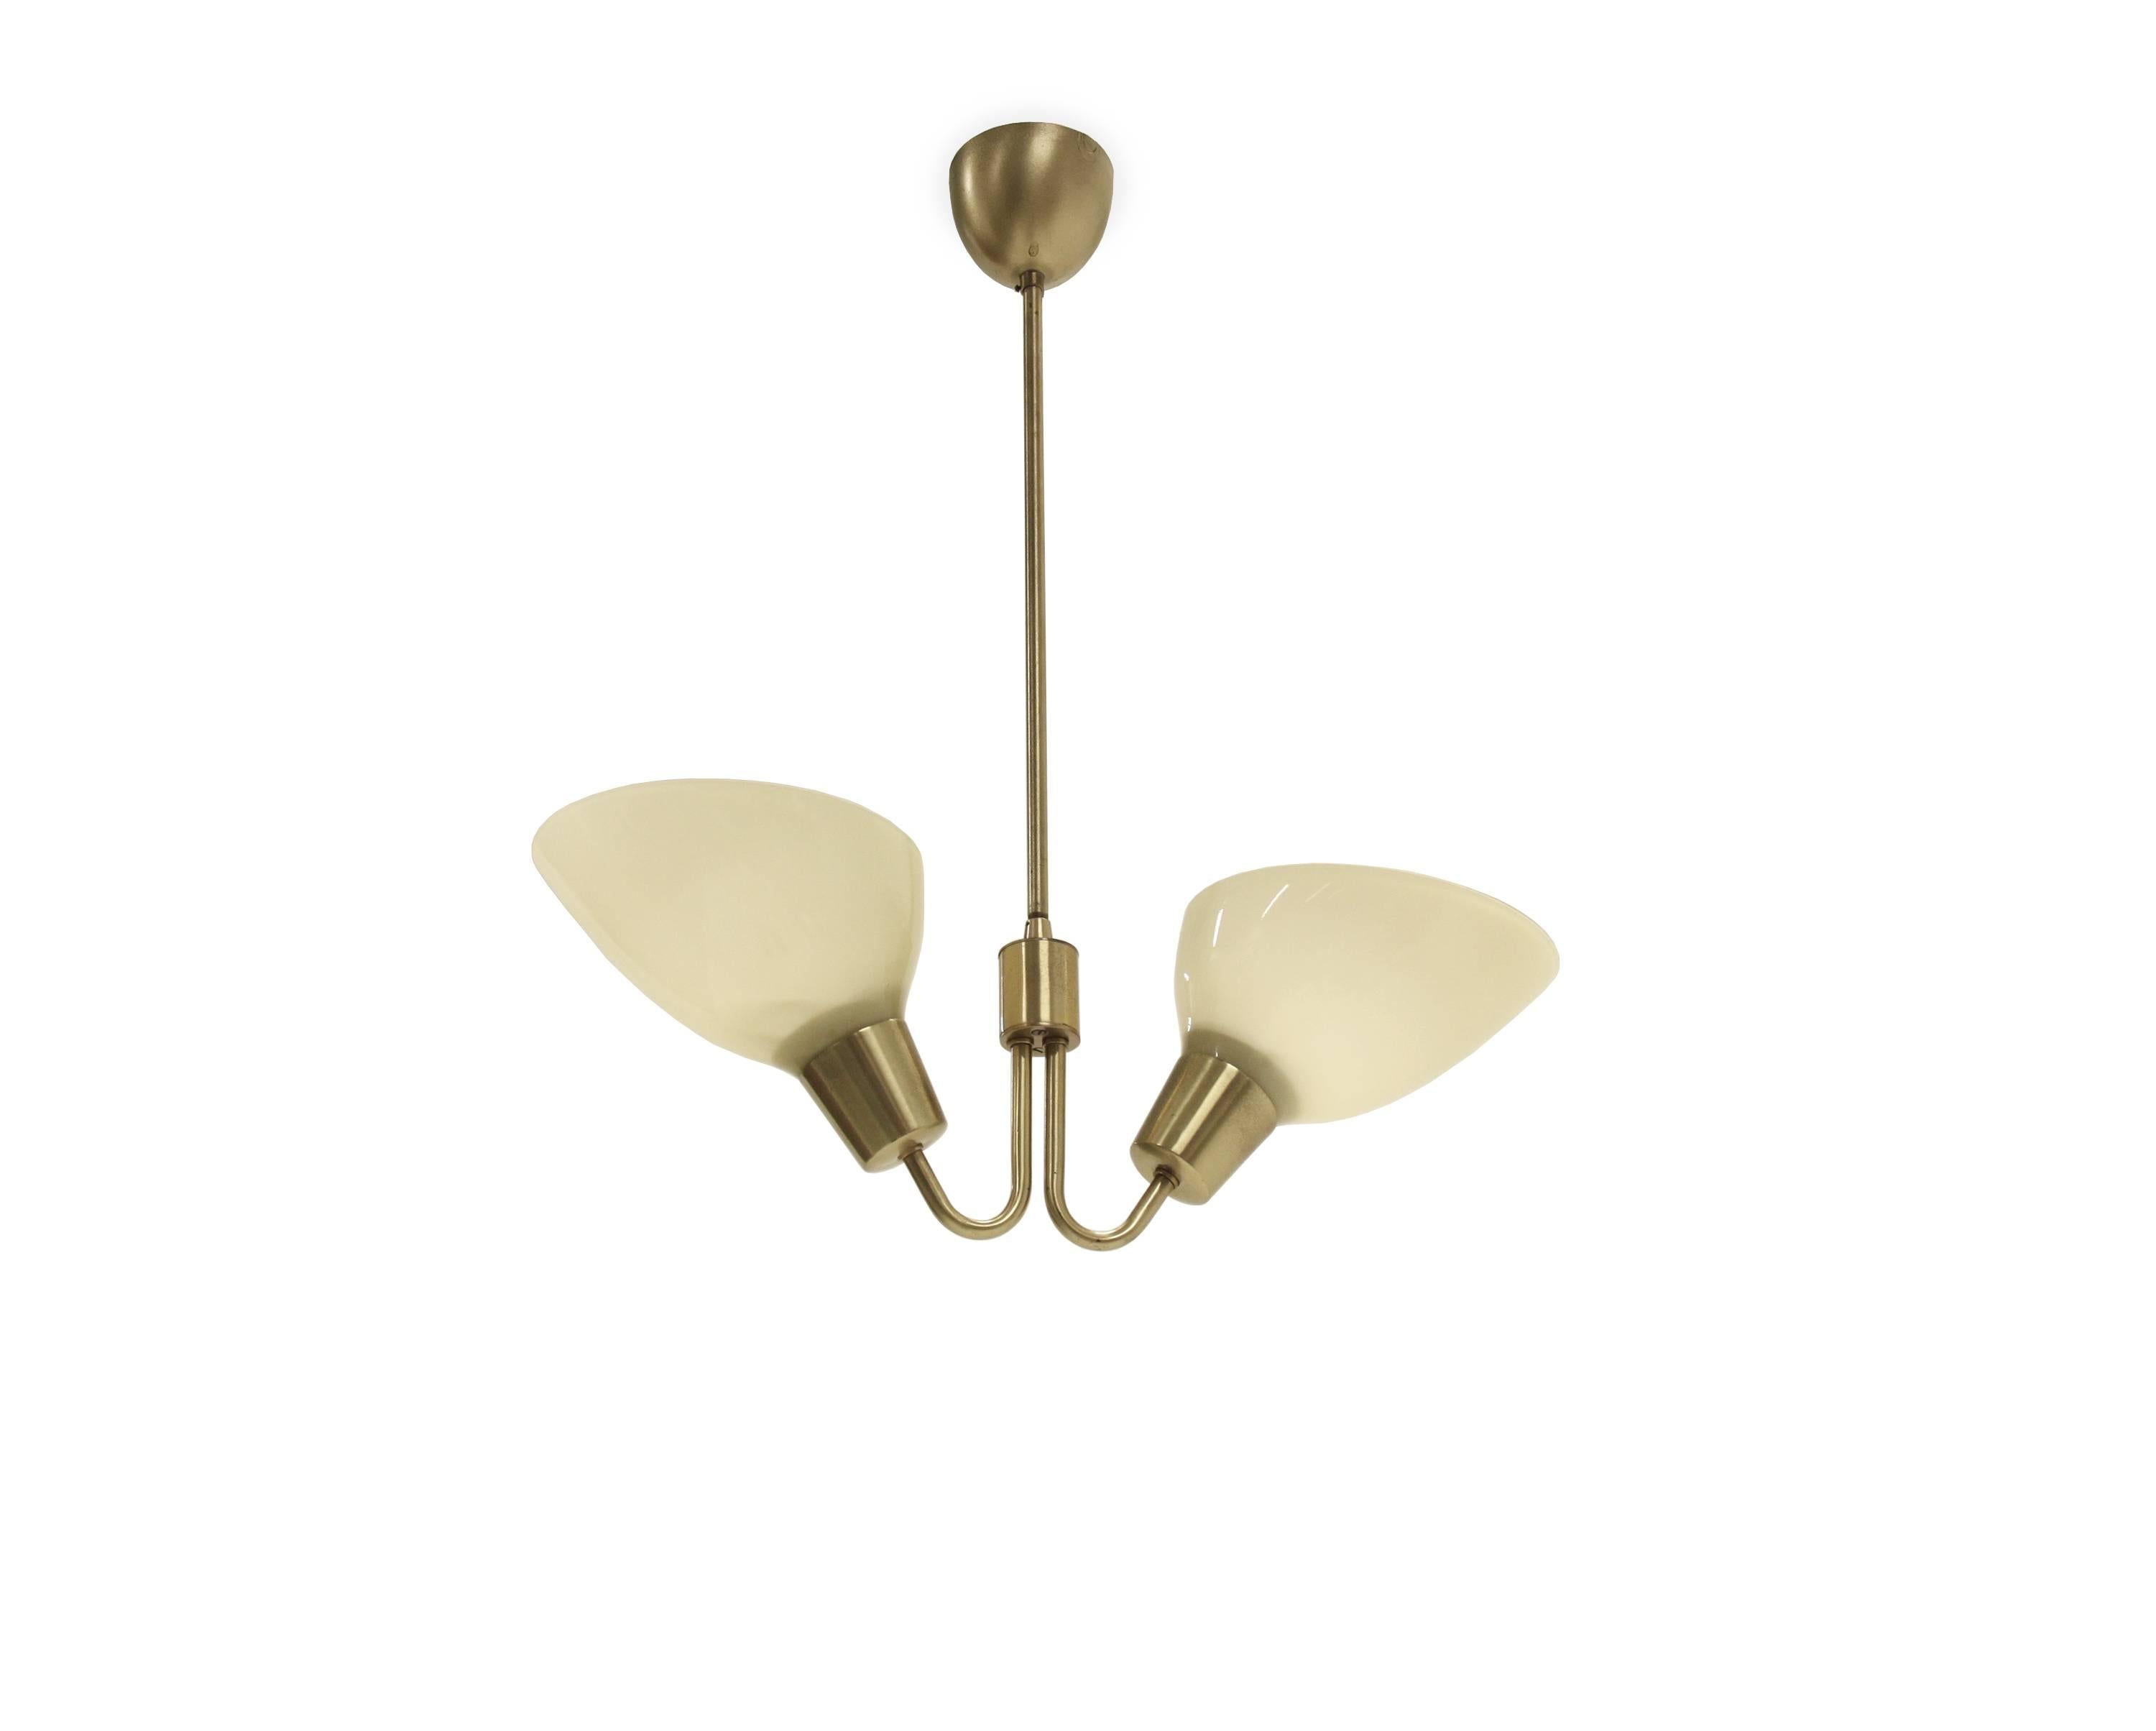 Mid-20th Century Scandinavian Mid-Century Ceiling Light in Brass, 1960s For Sale